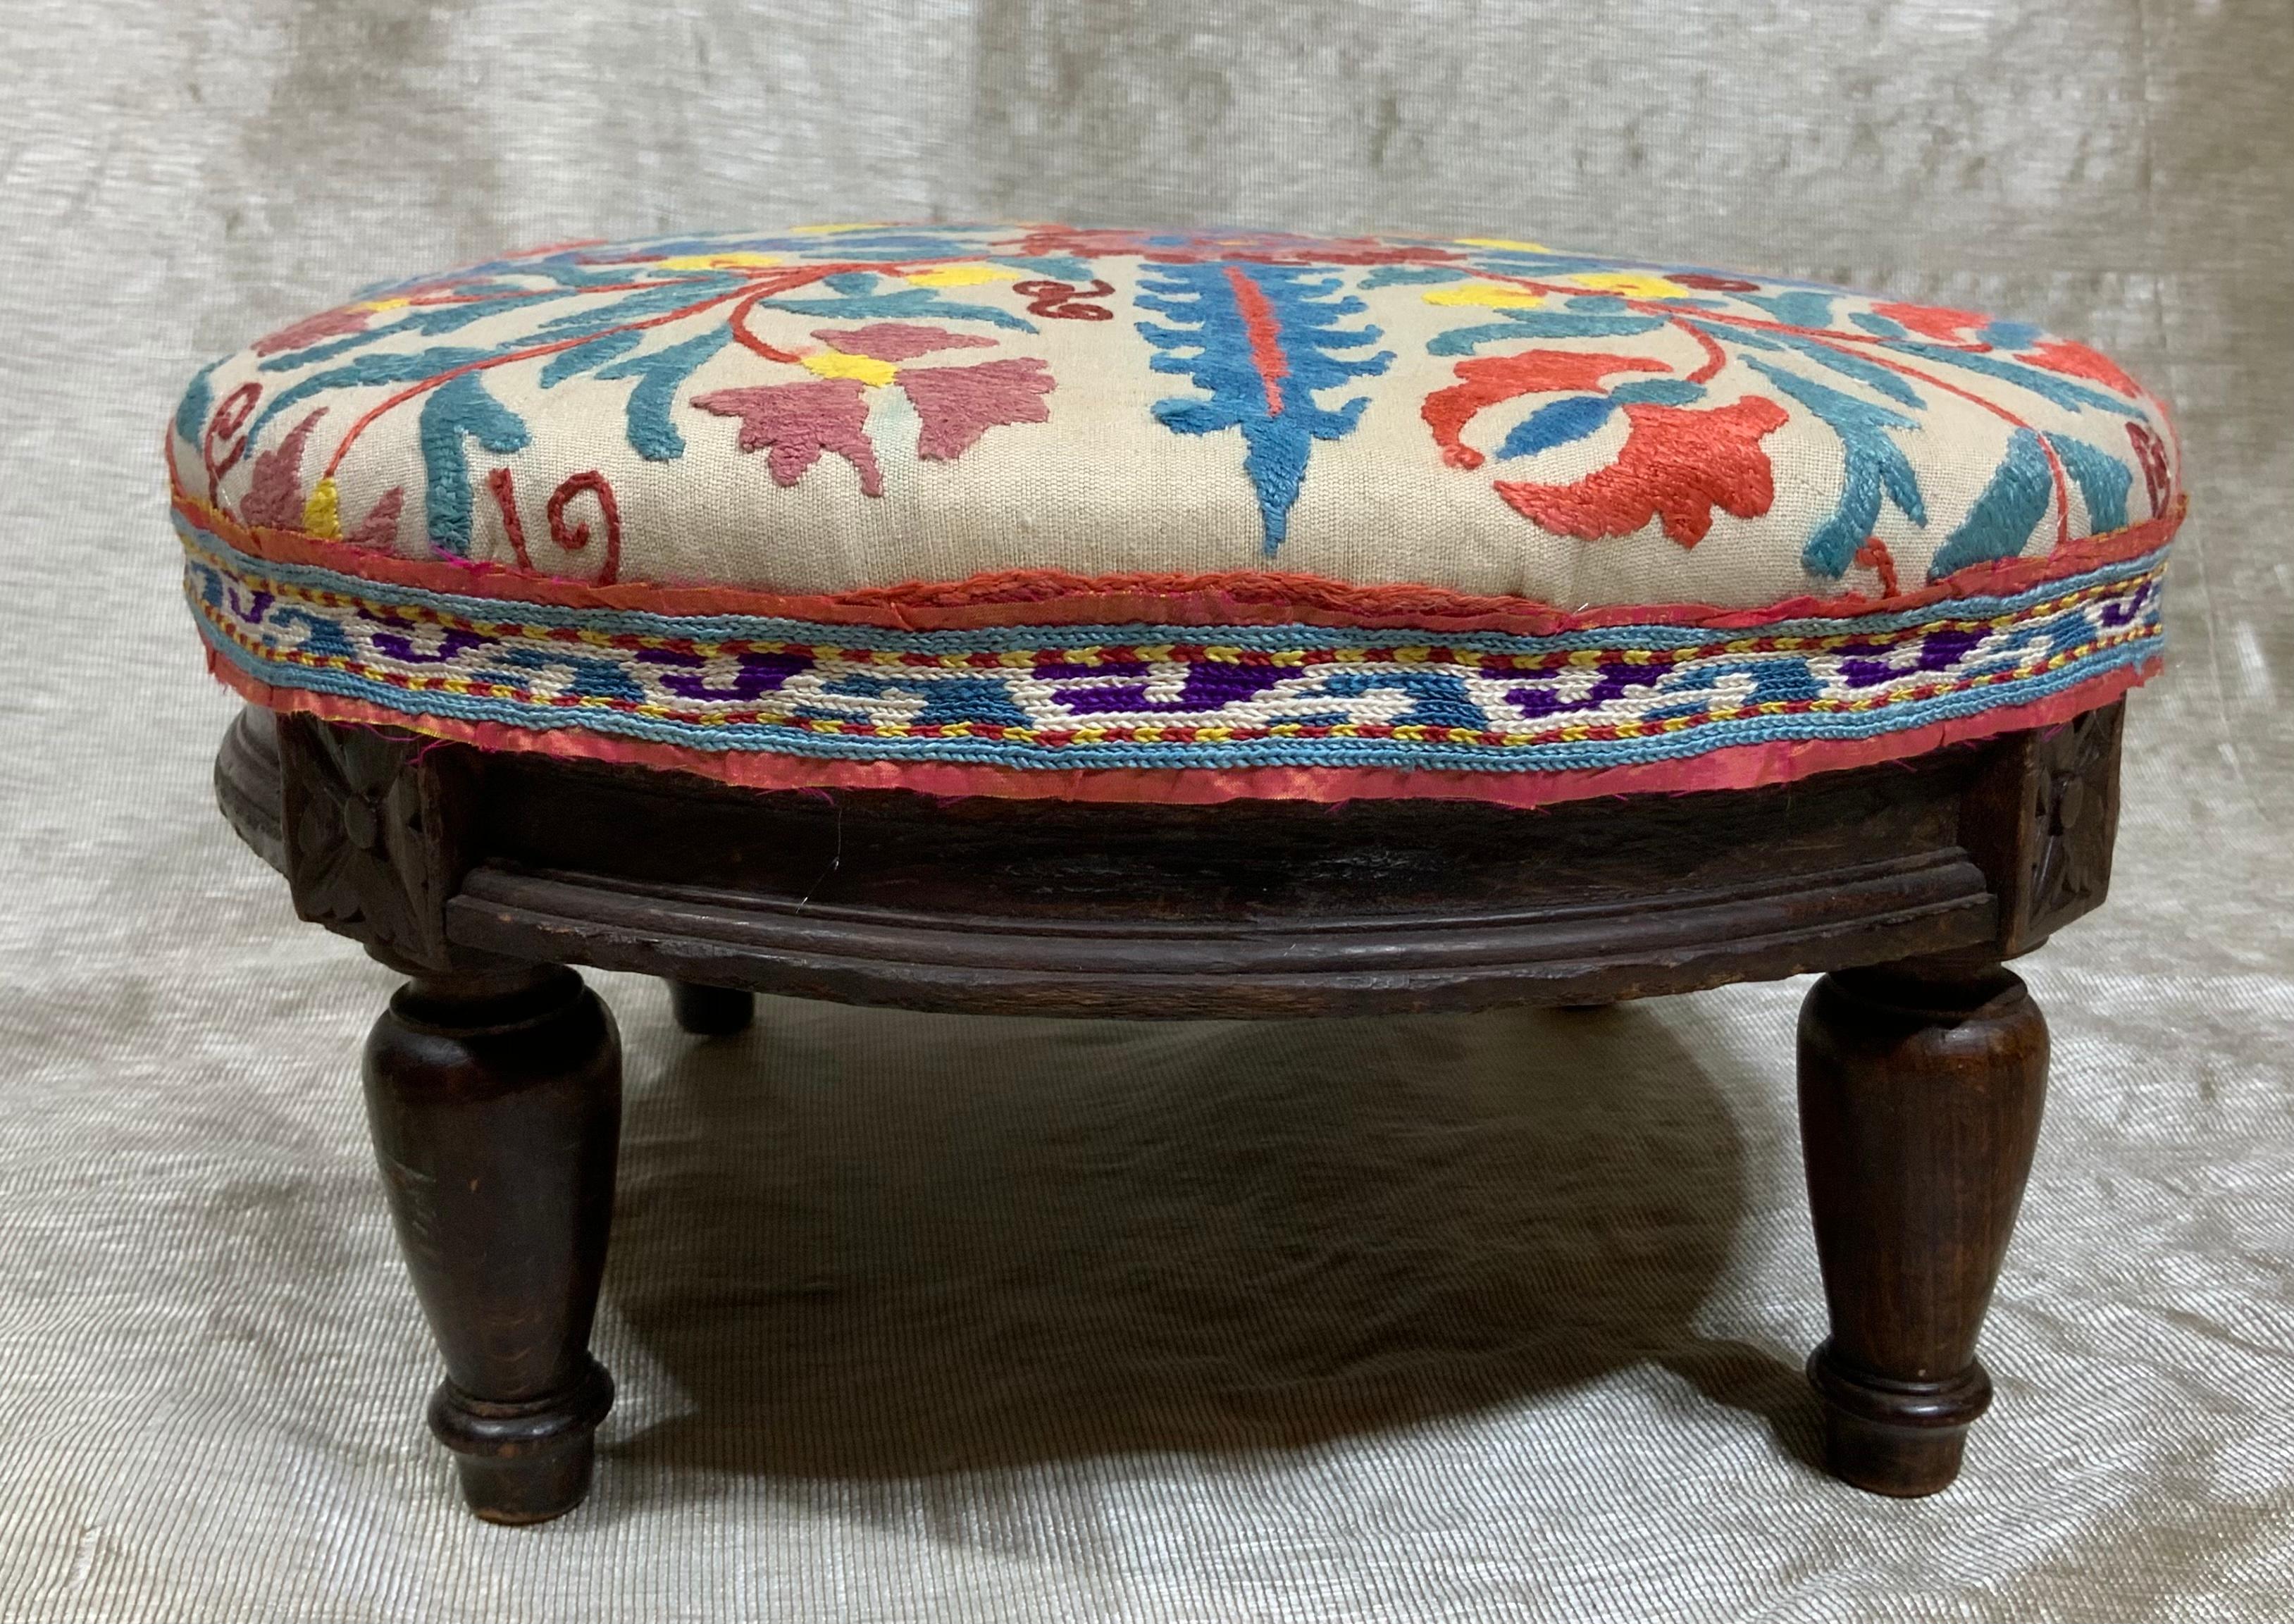 Early 20th Century Antique Suzani Foot Stool